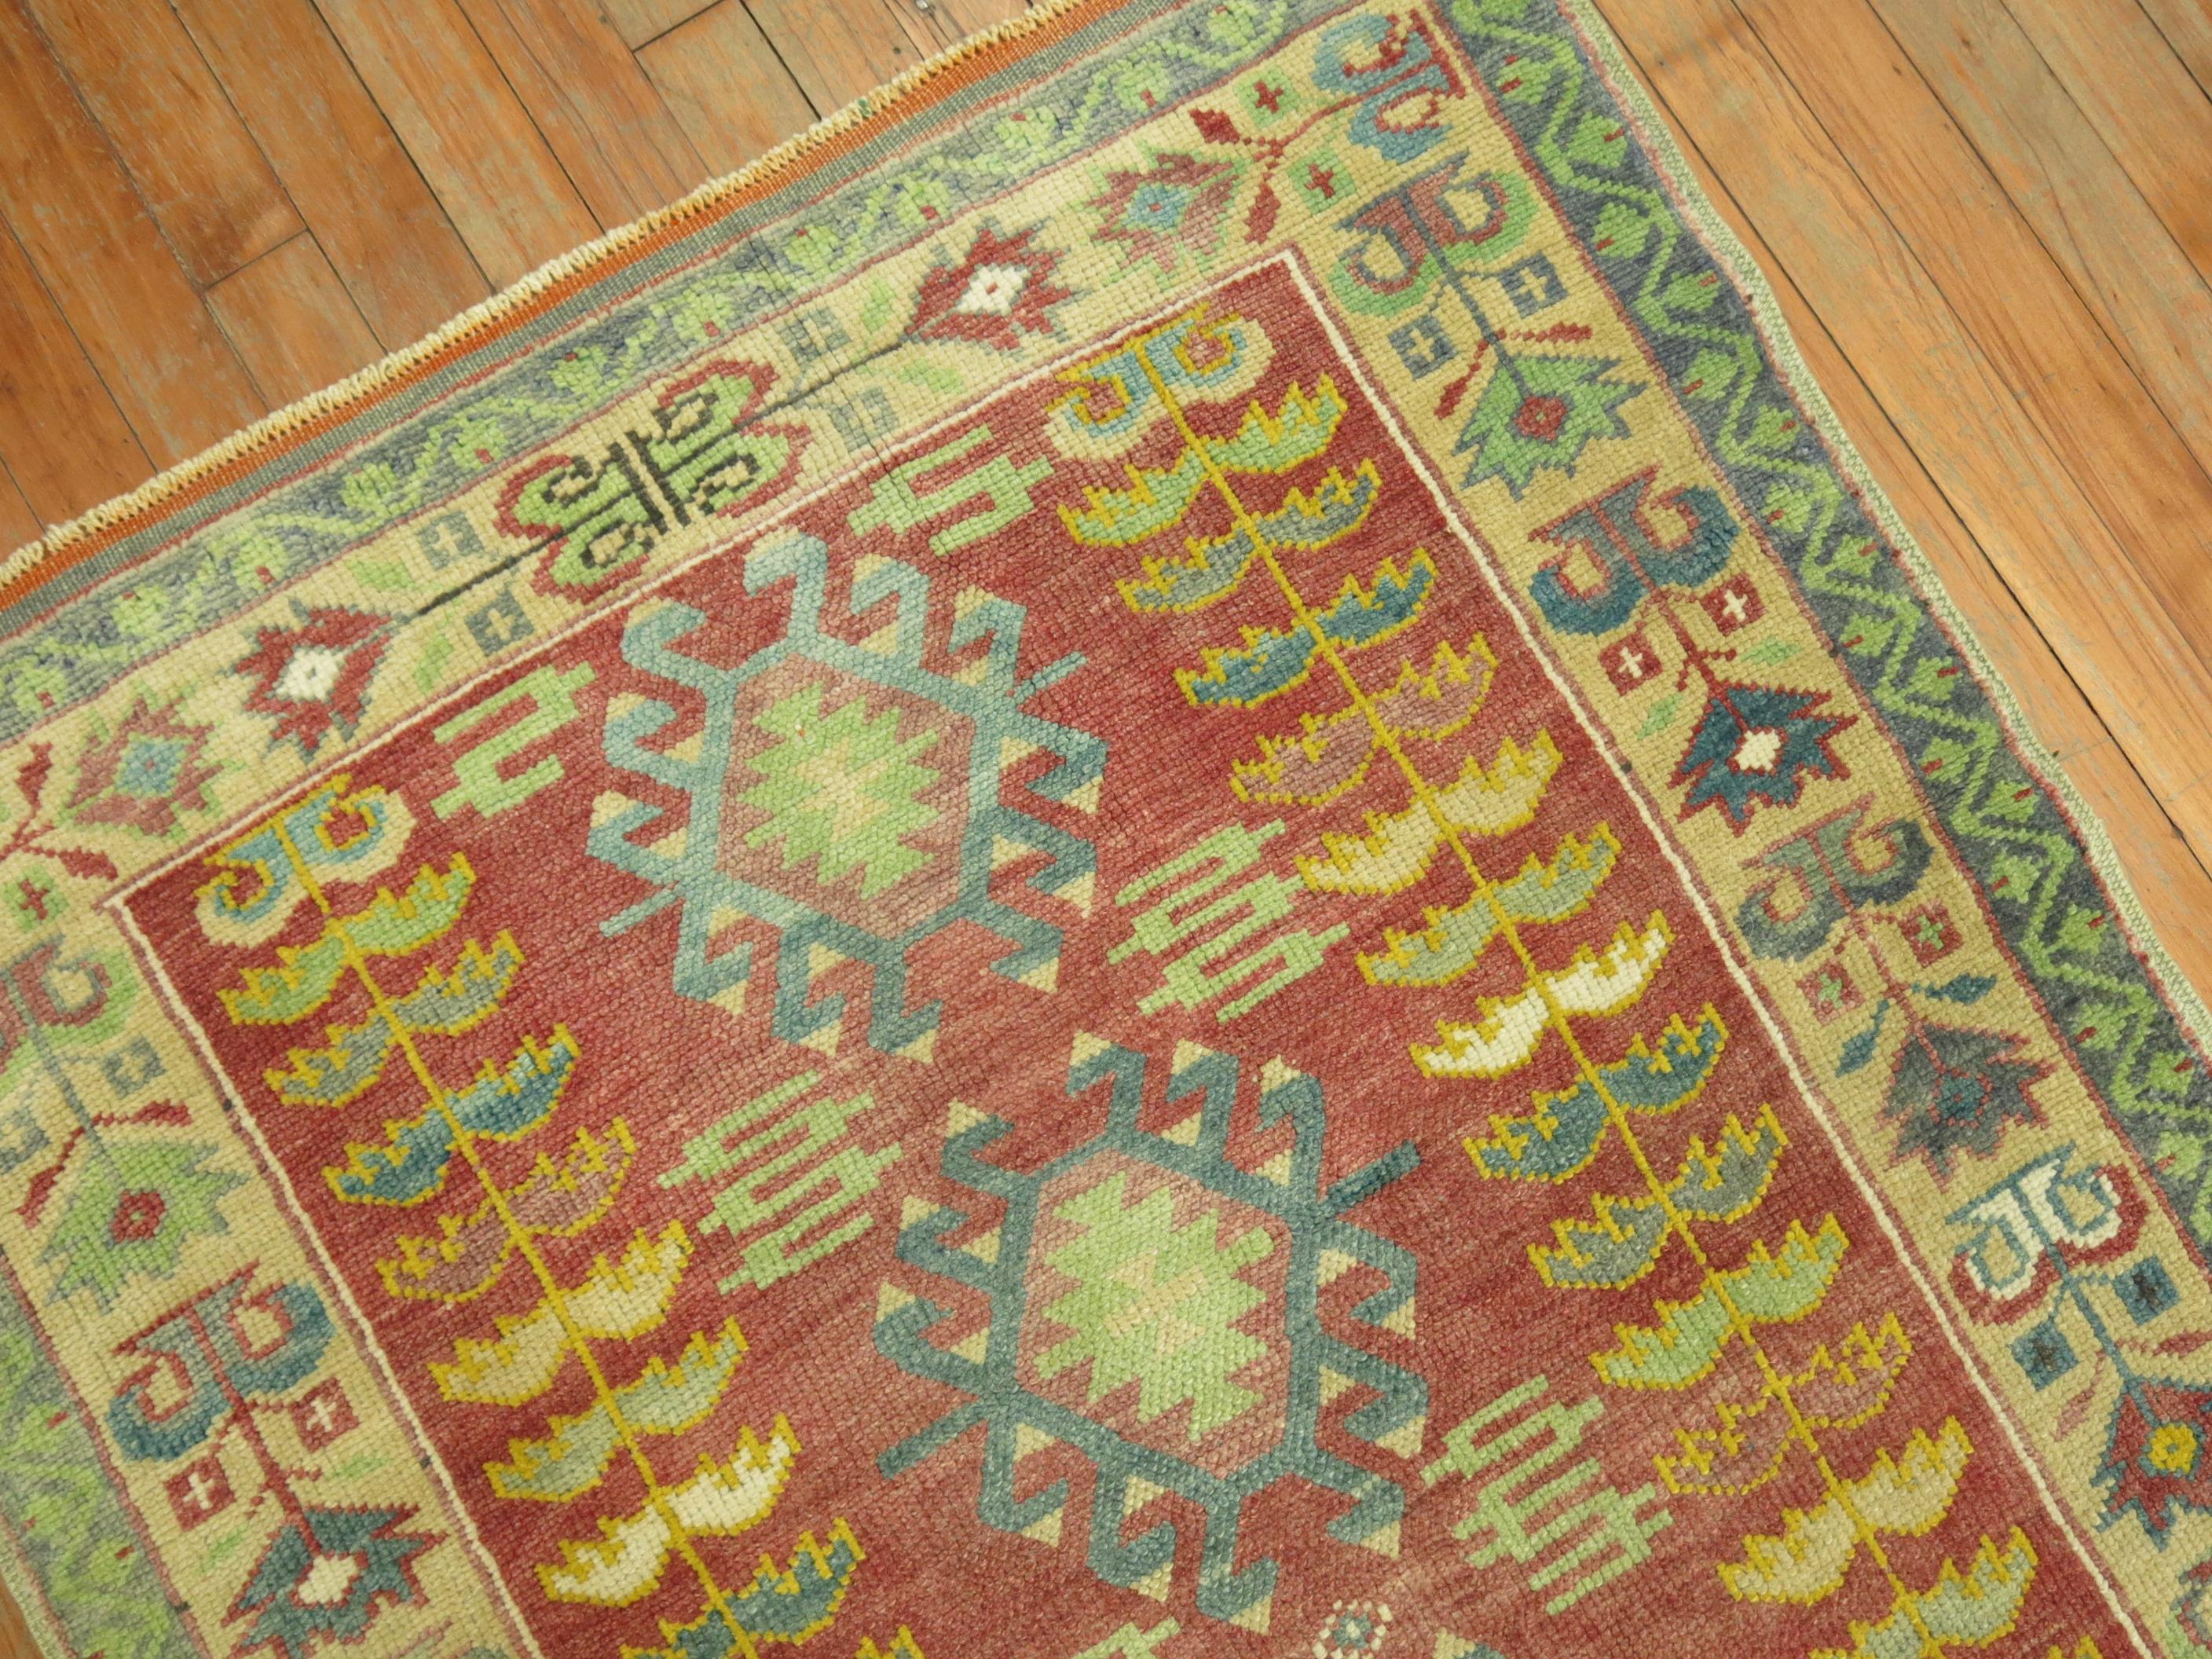 A one of a kind Turkish scatter size throw rug from the mid-20th century.